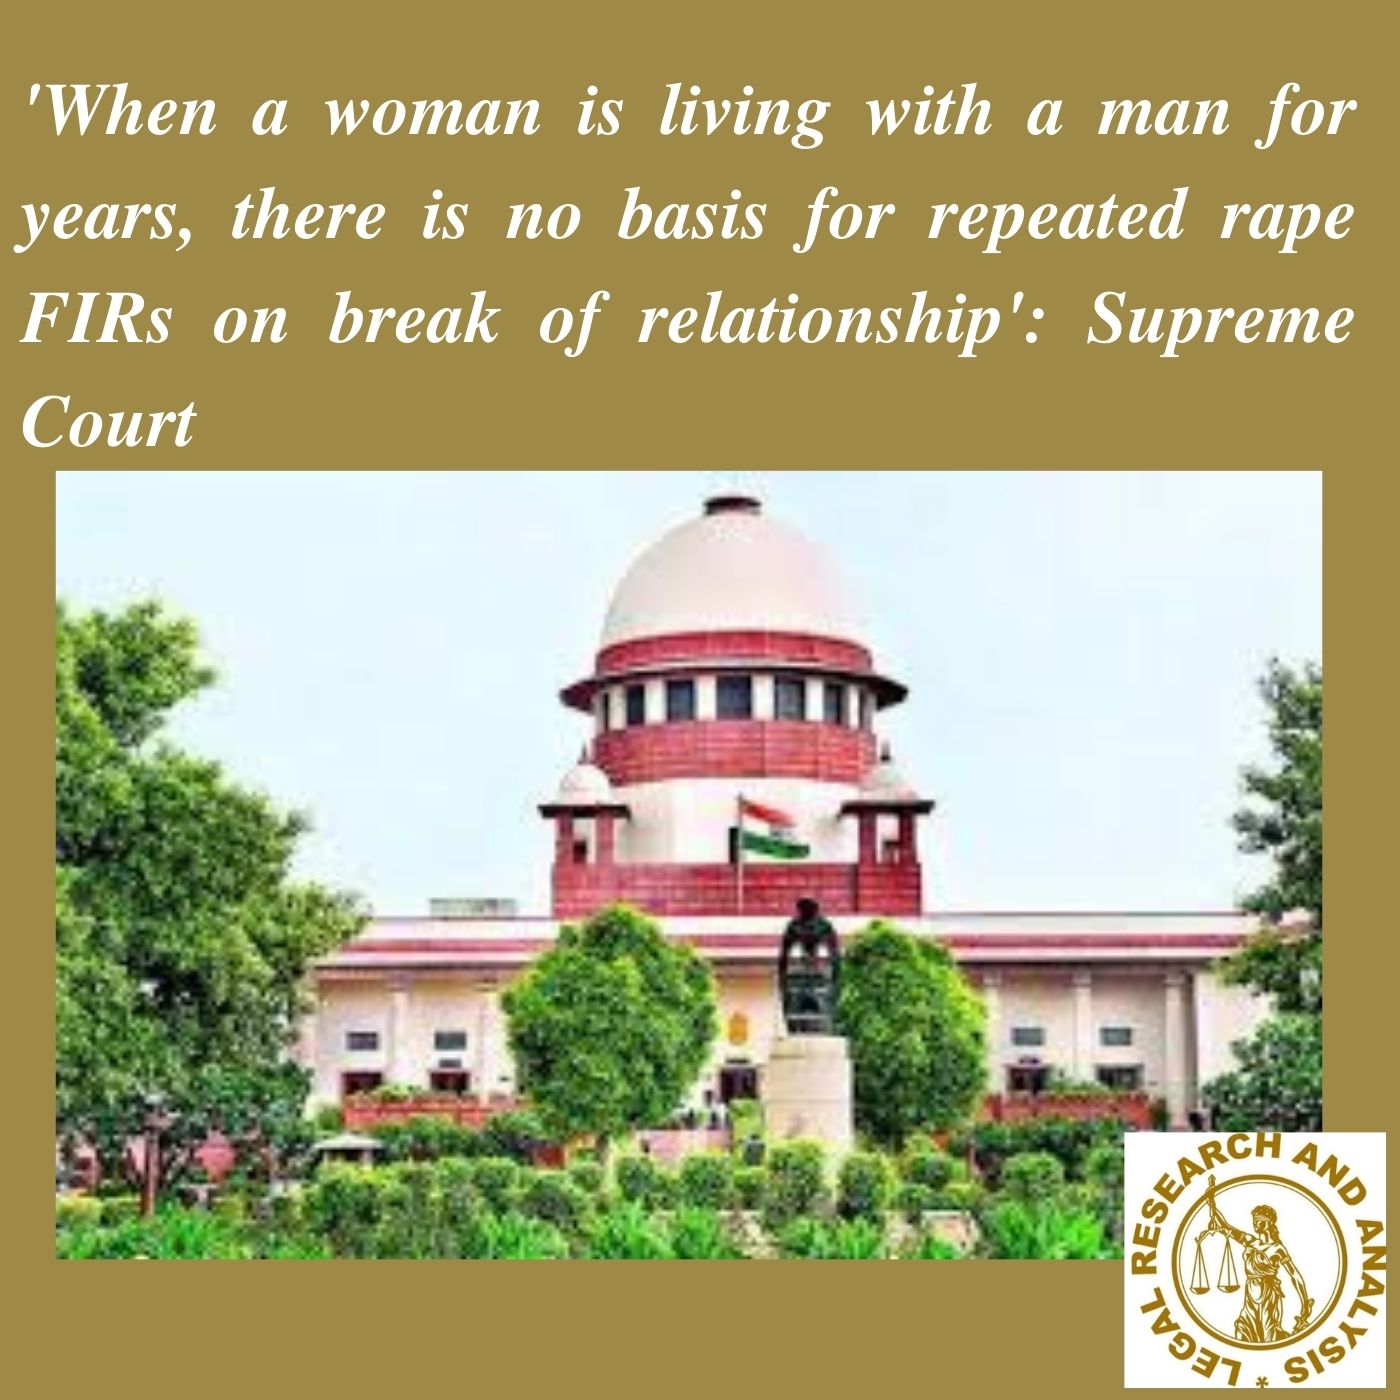 ‘When a woman is living with a man for years, there is no basis for repeated rape FIRs on the break of relationship’: Supreme Court